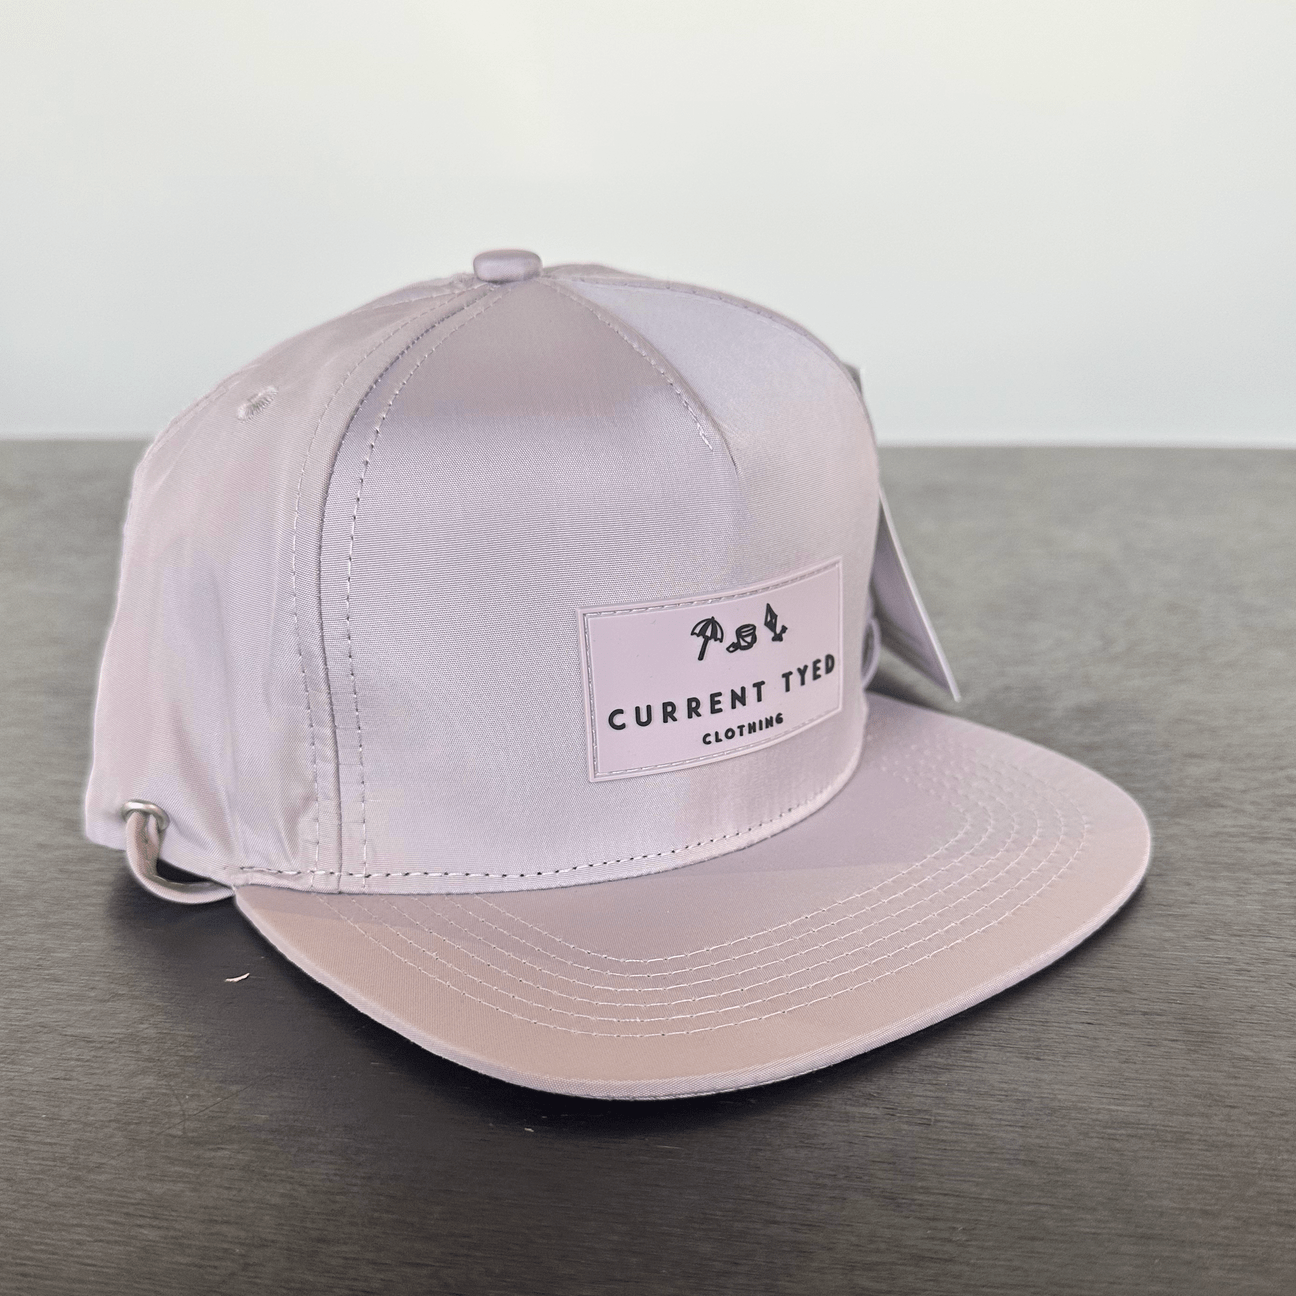 Current Tyed Accessories Hats Dusty Lilac / S Waterproof Snapback Hats